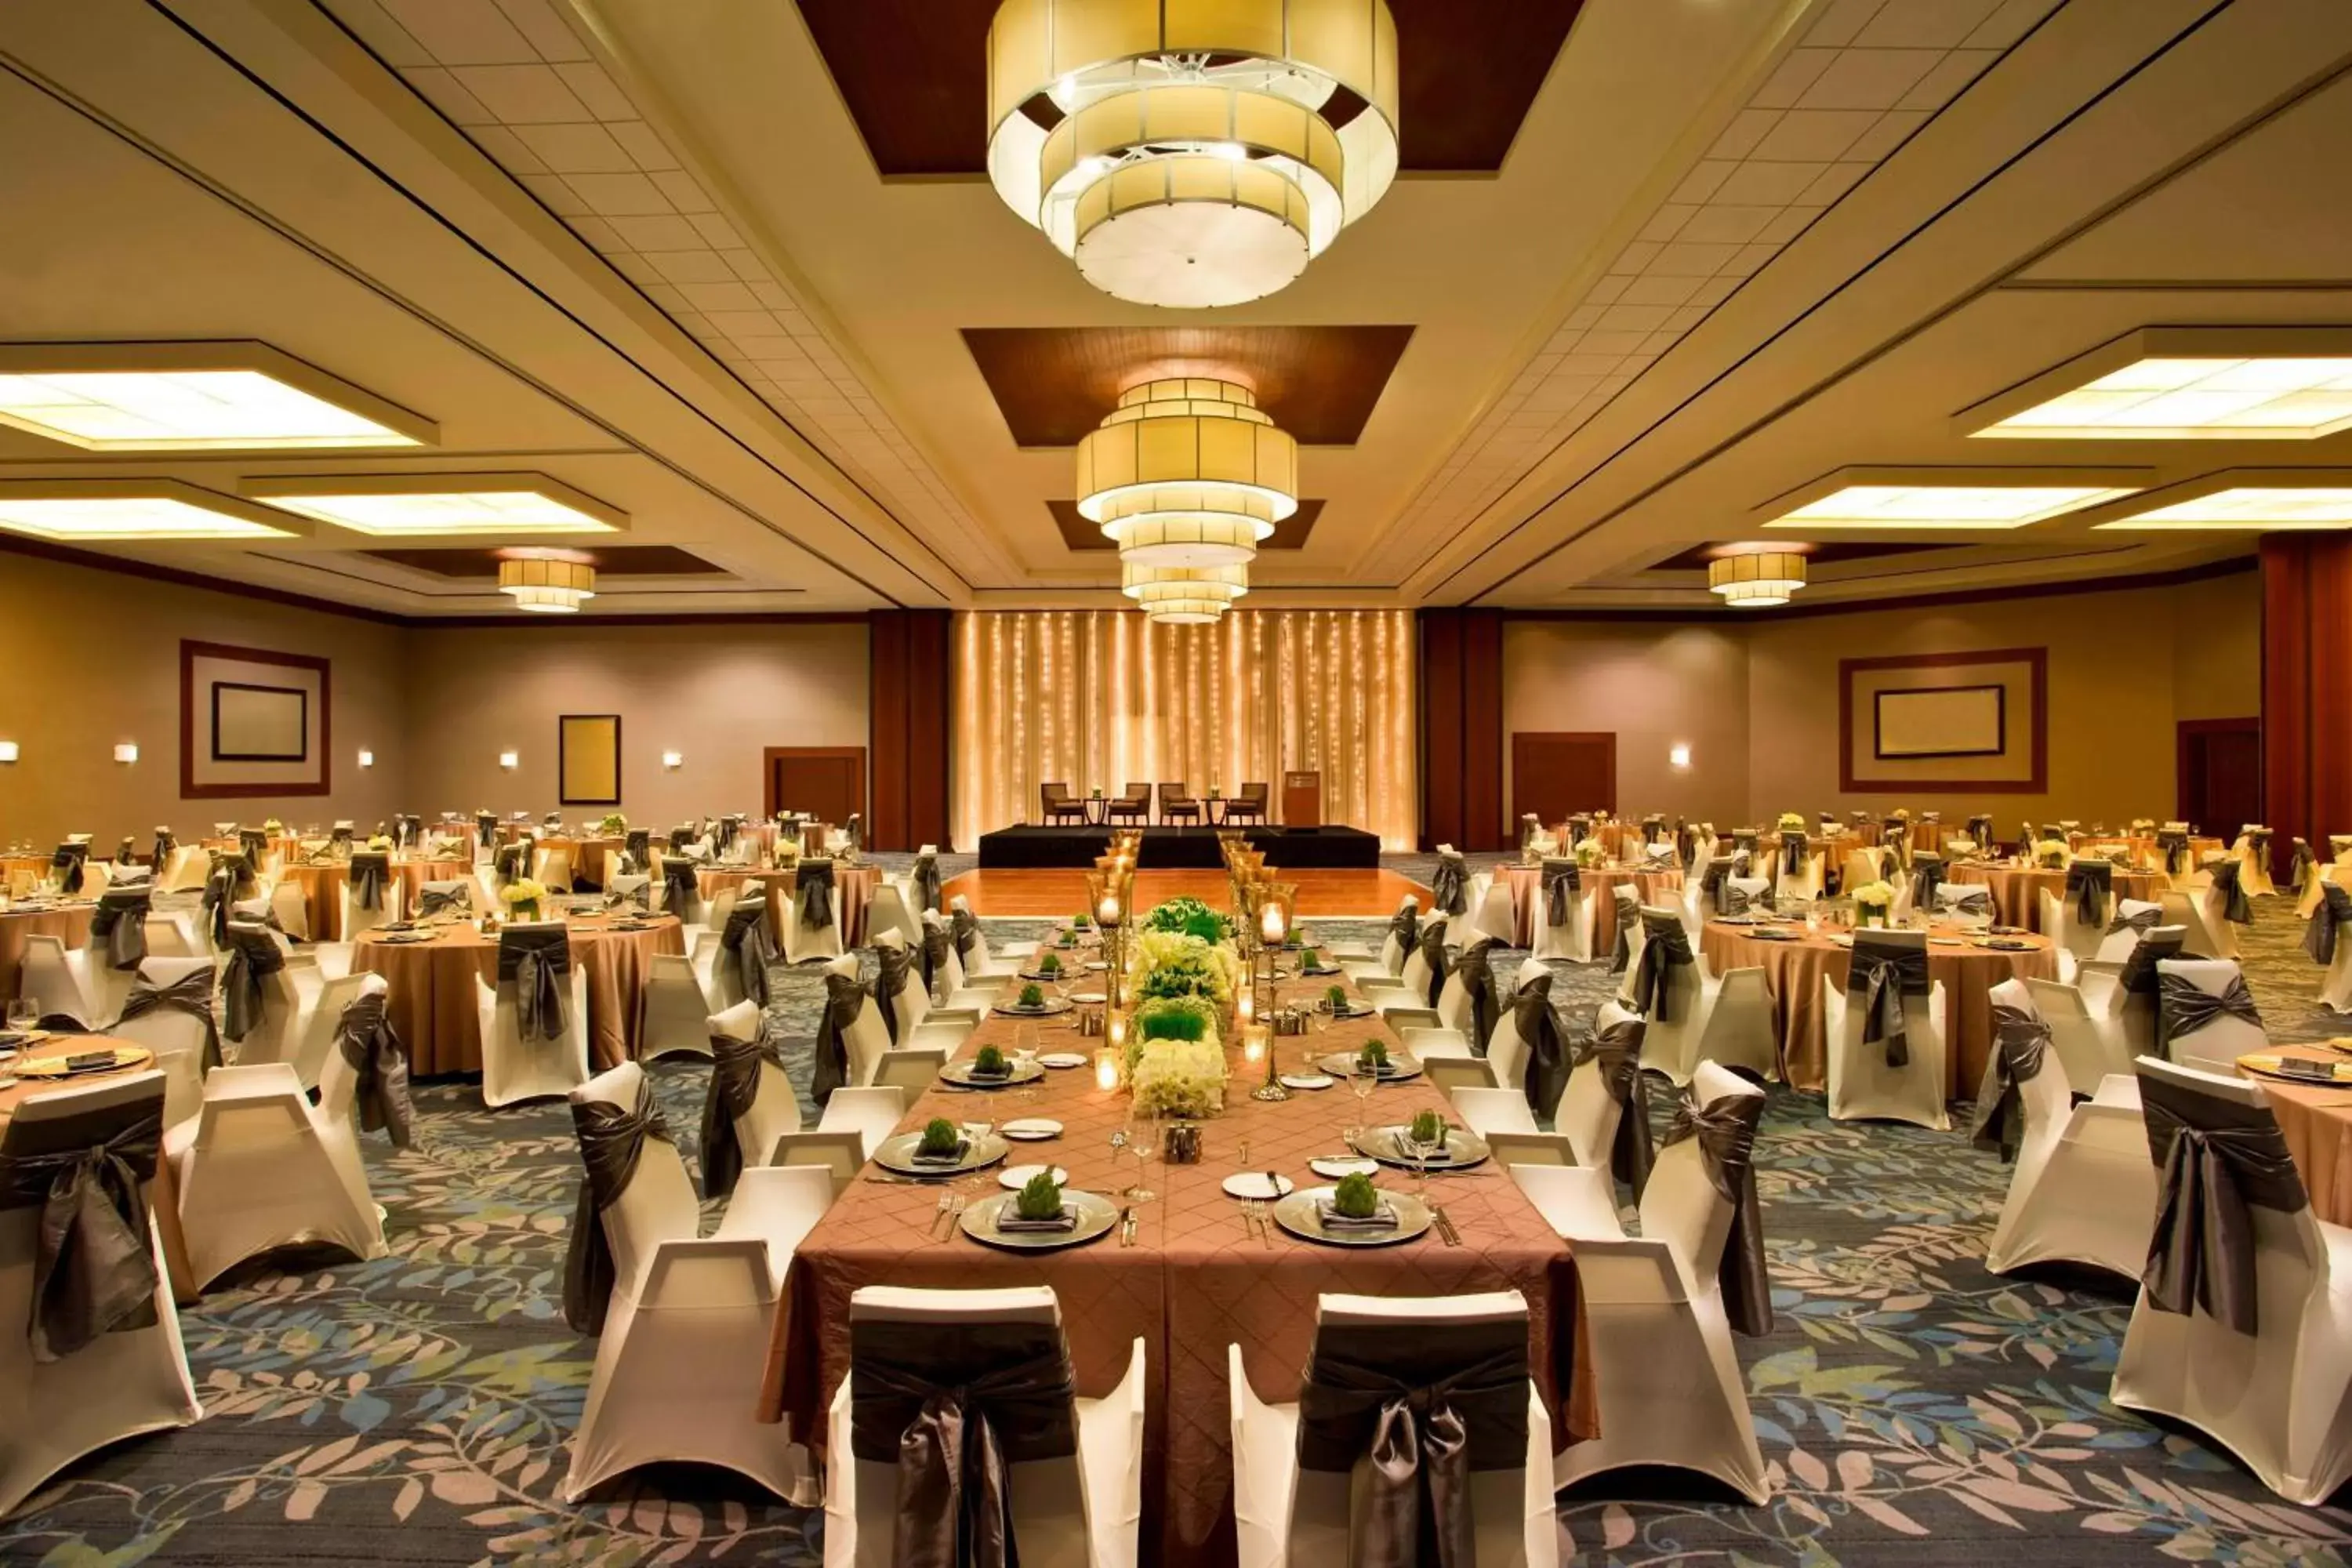 Meeting/conference room, Banquet Facilities in The Westin Houston, Memorial City